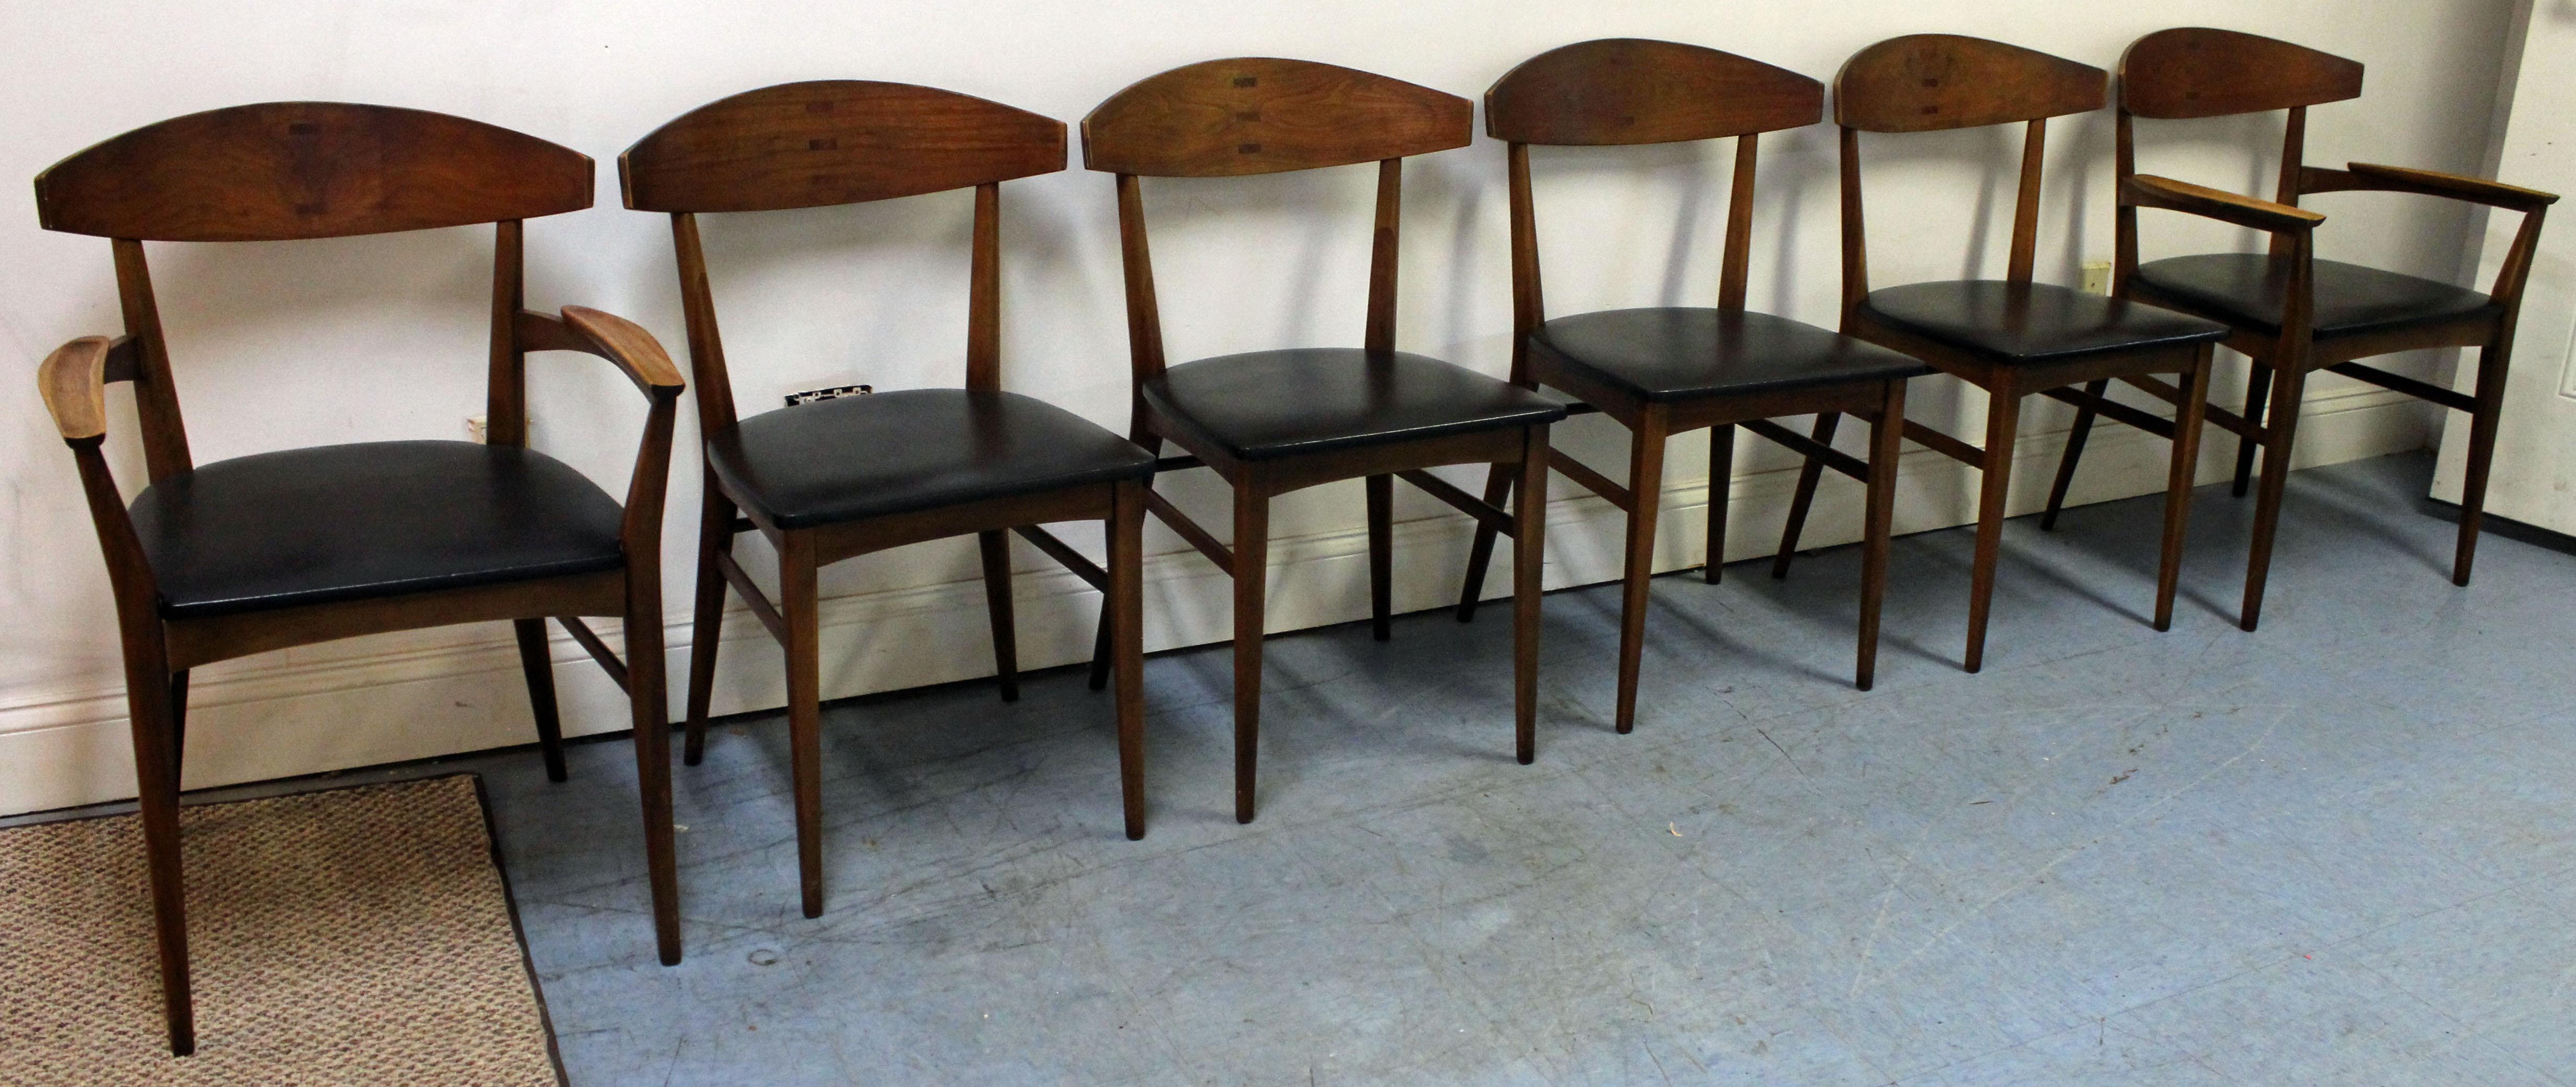 What a find. Offered is a very cool set of six Mid-Century Modern dining chairs, designed by Paul McCobb for Lane's 